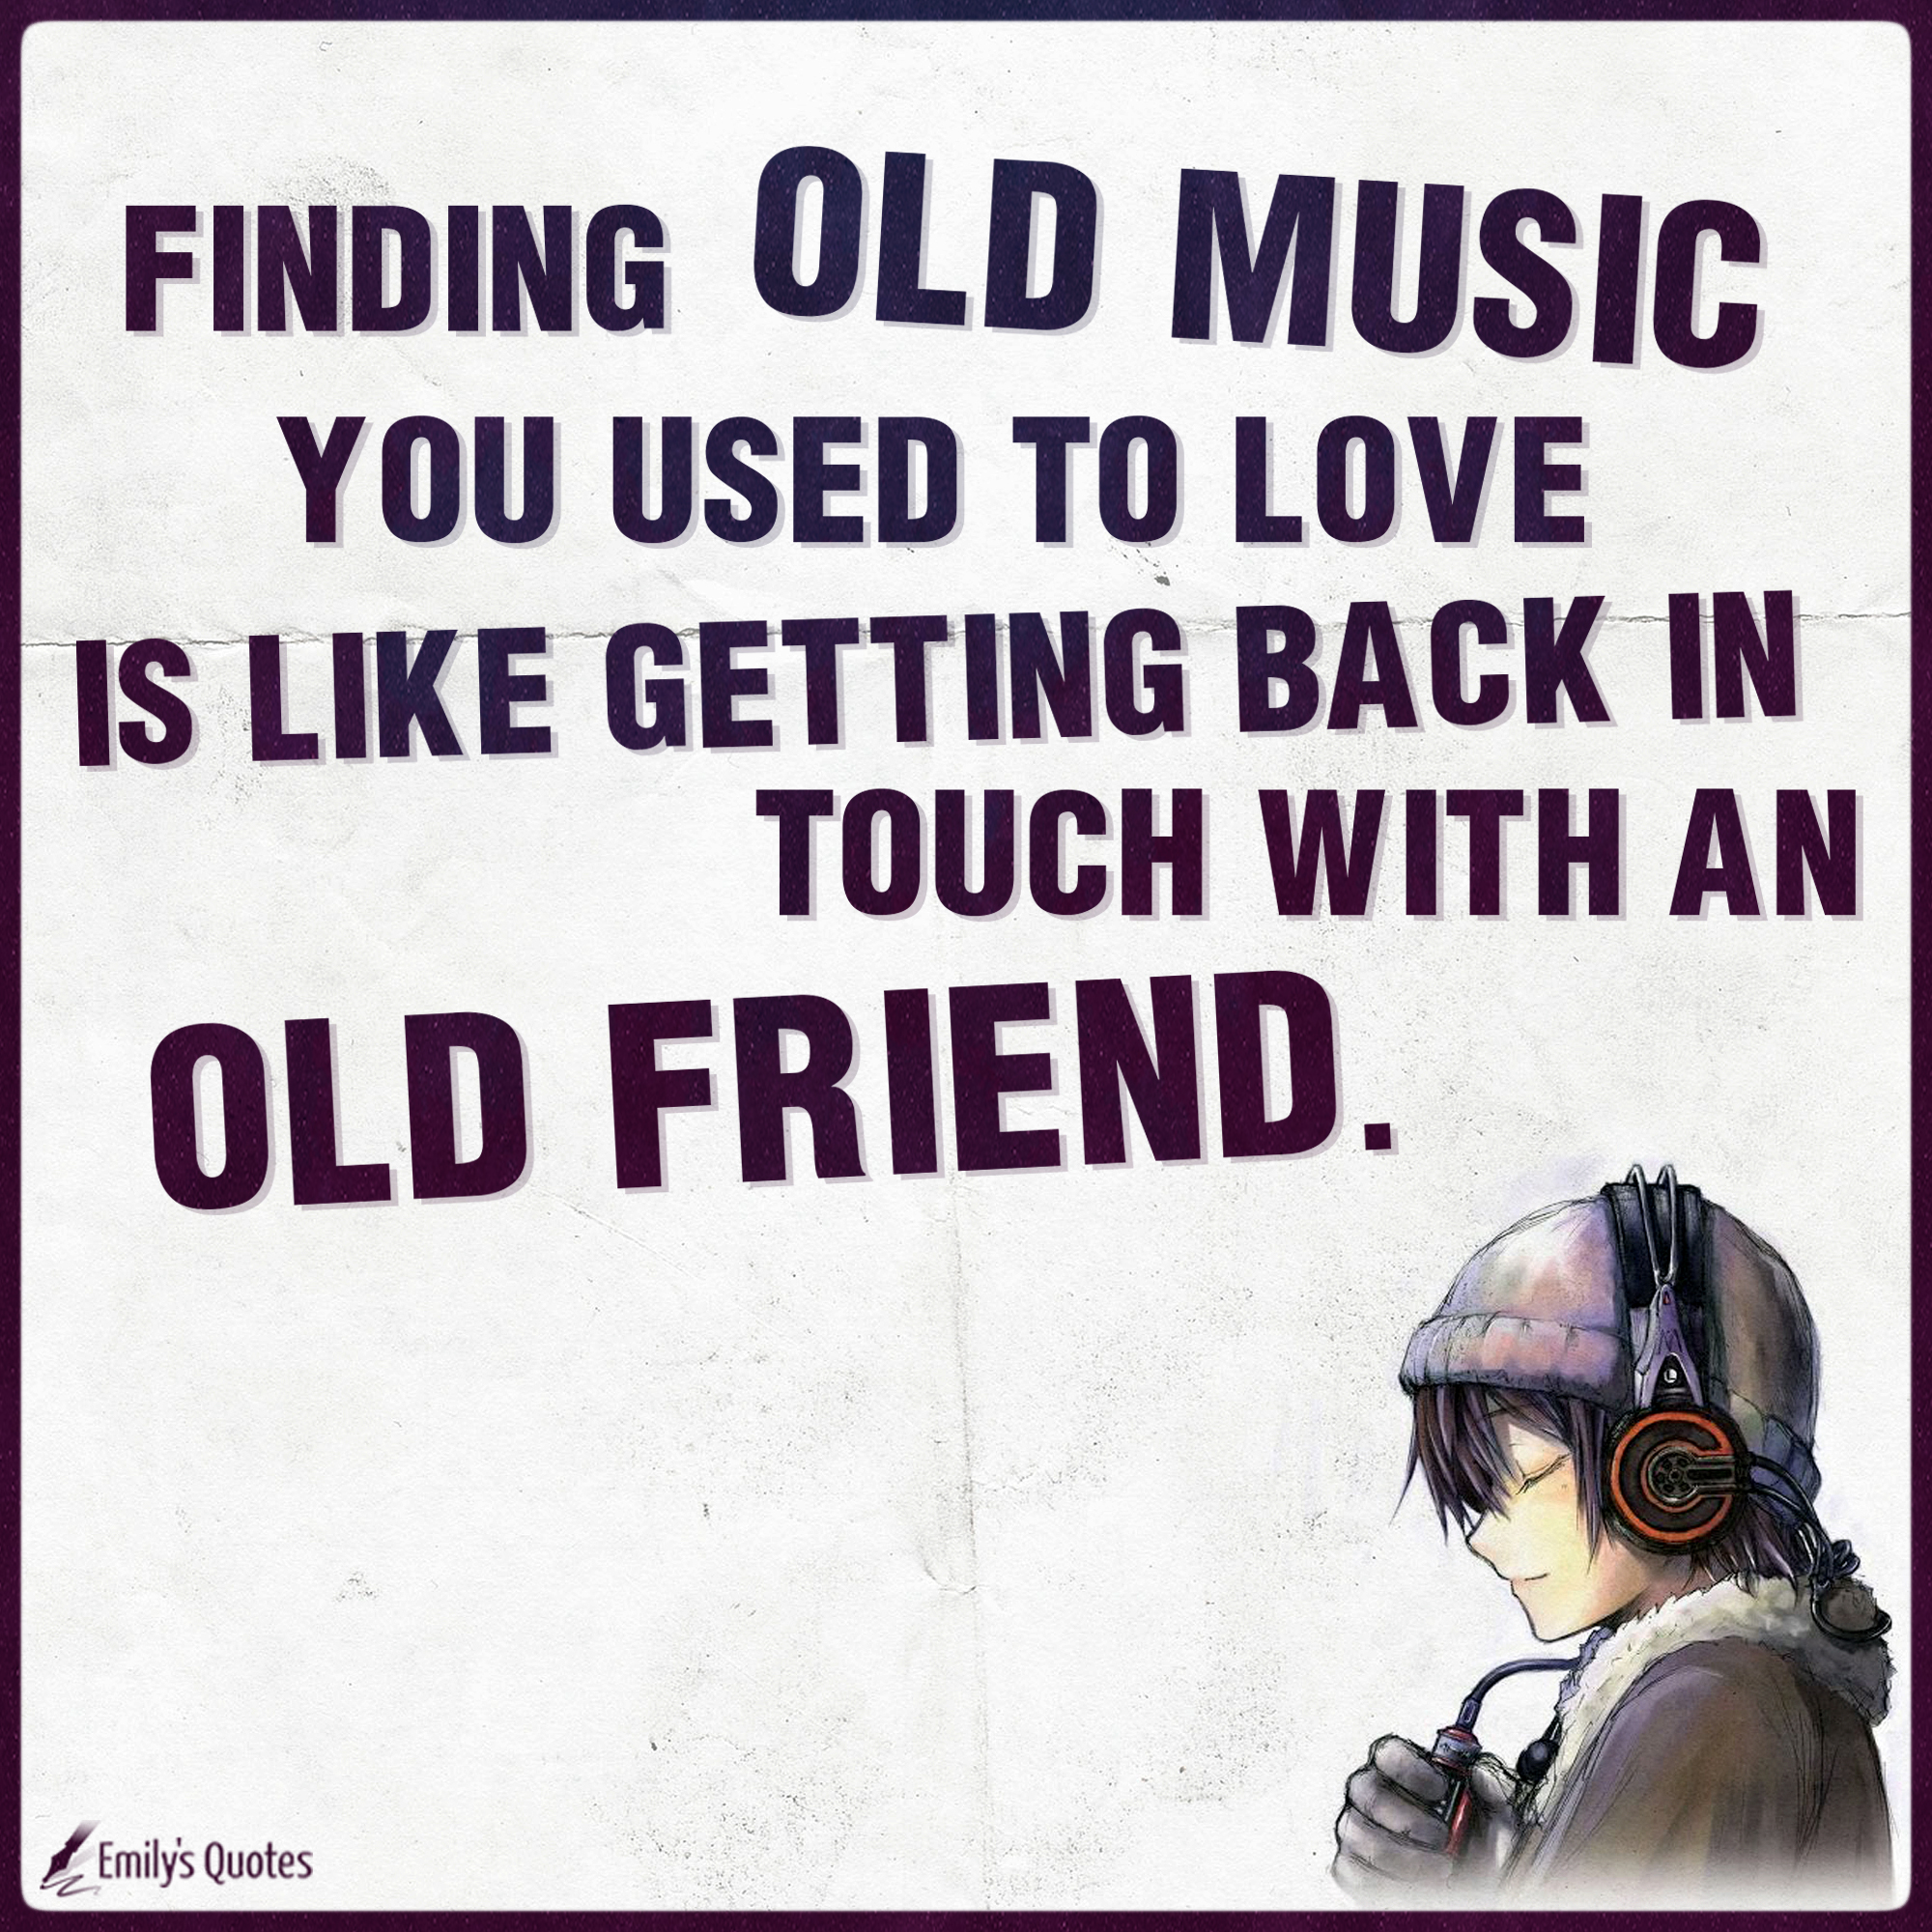 Finding old music you used to love is like getting back in touch